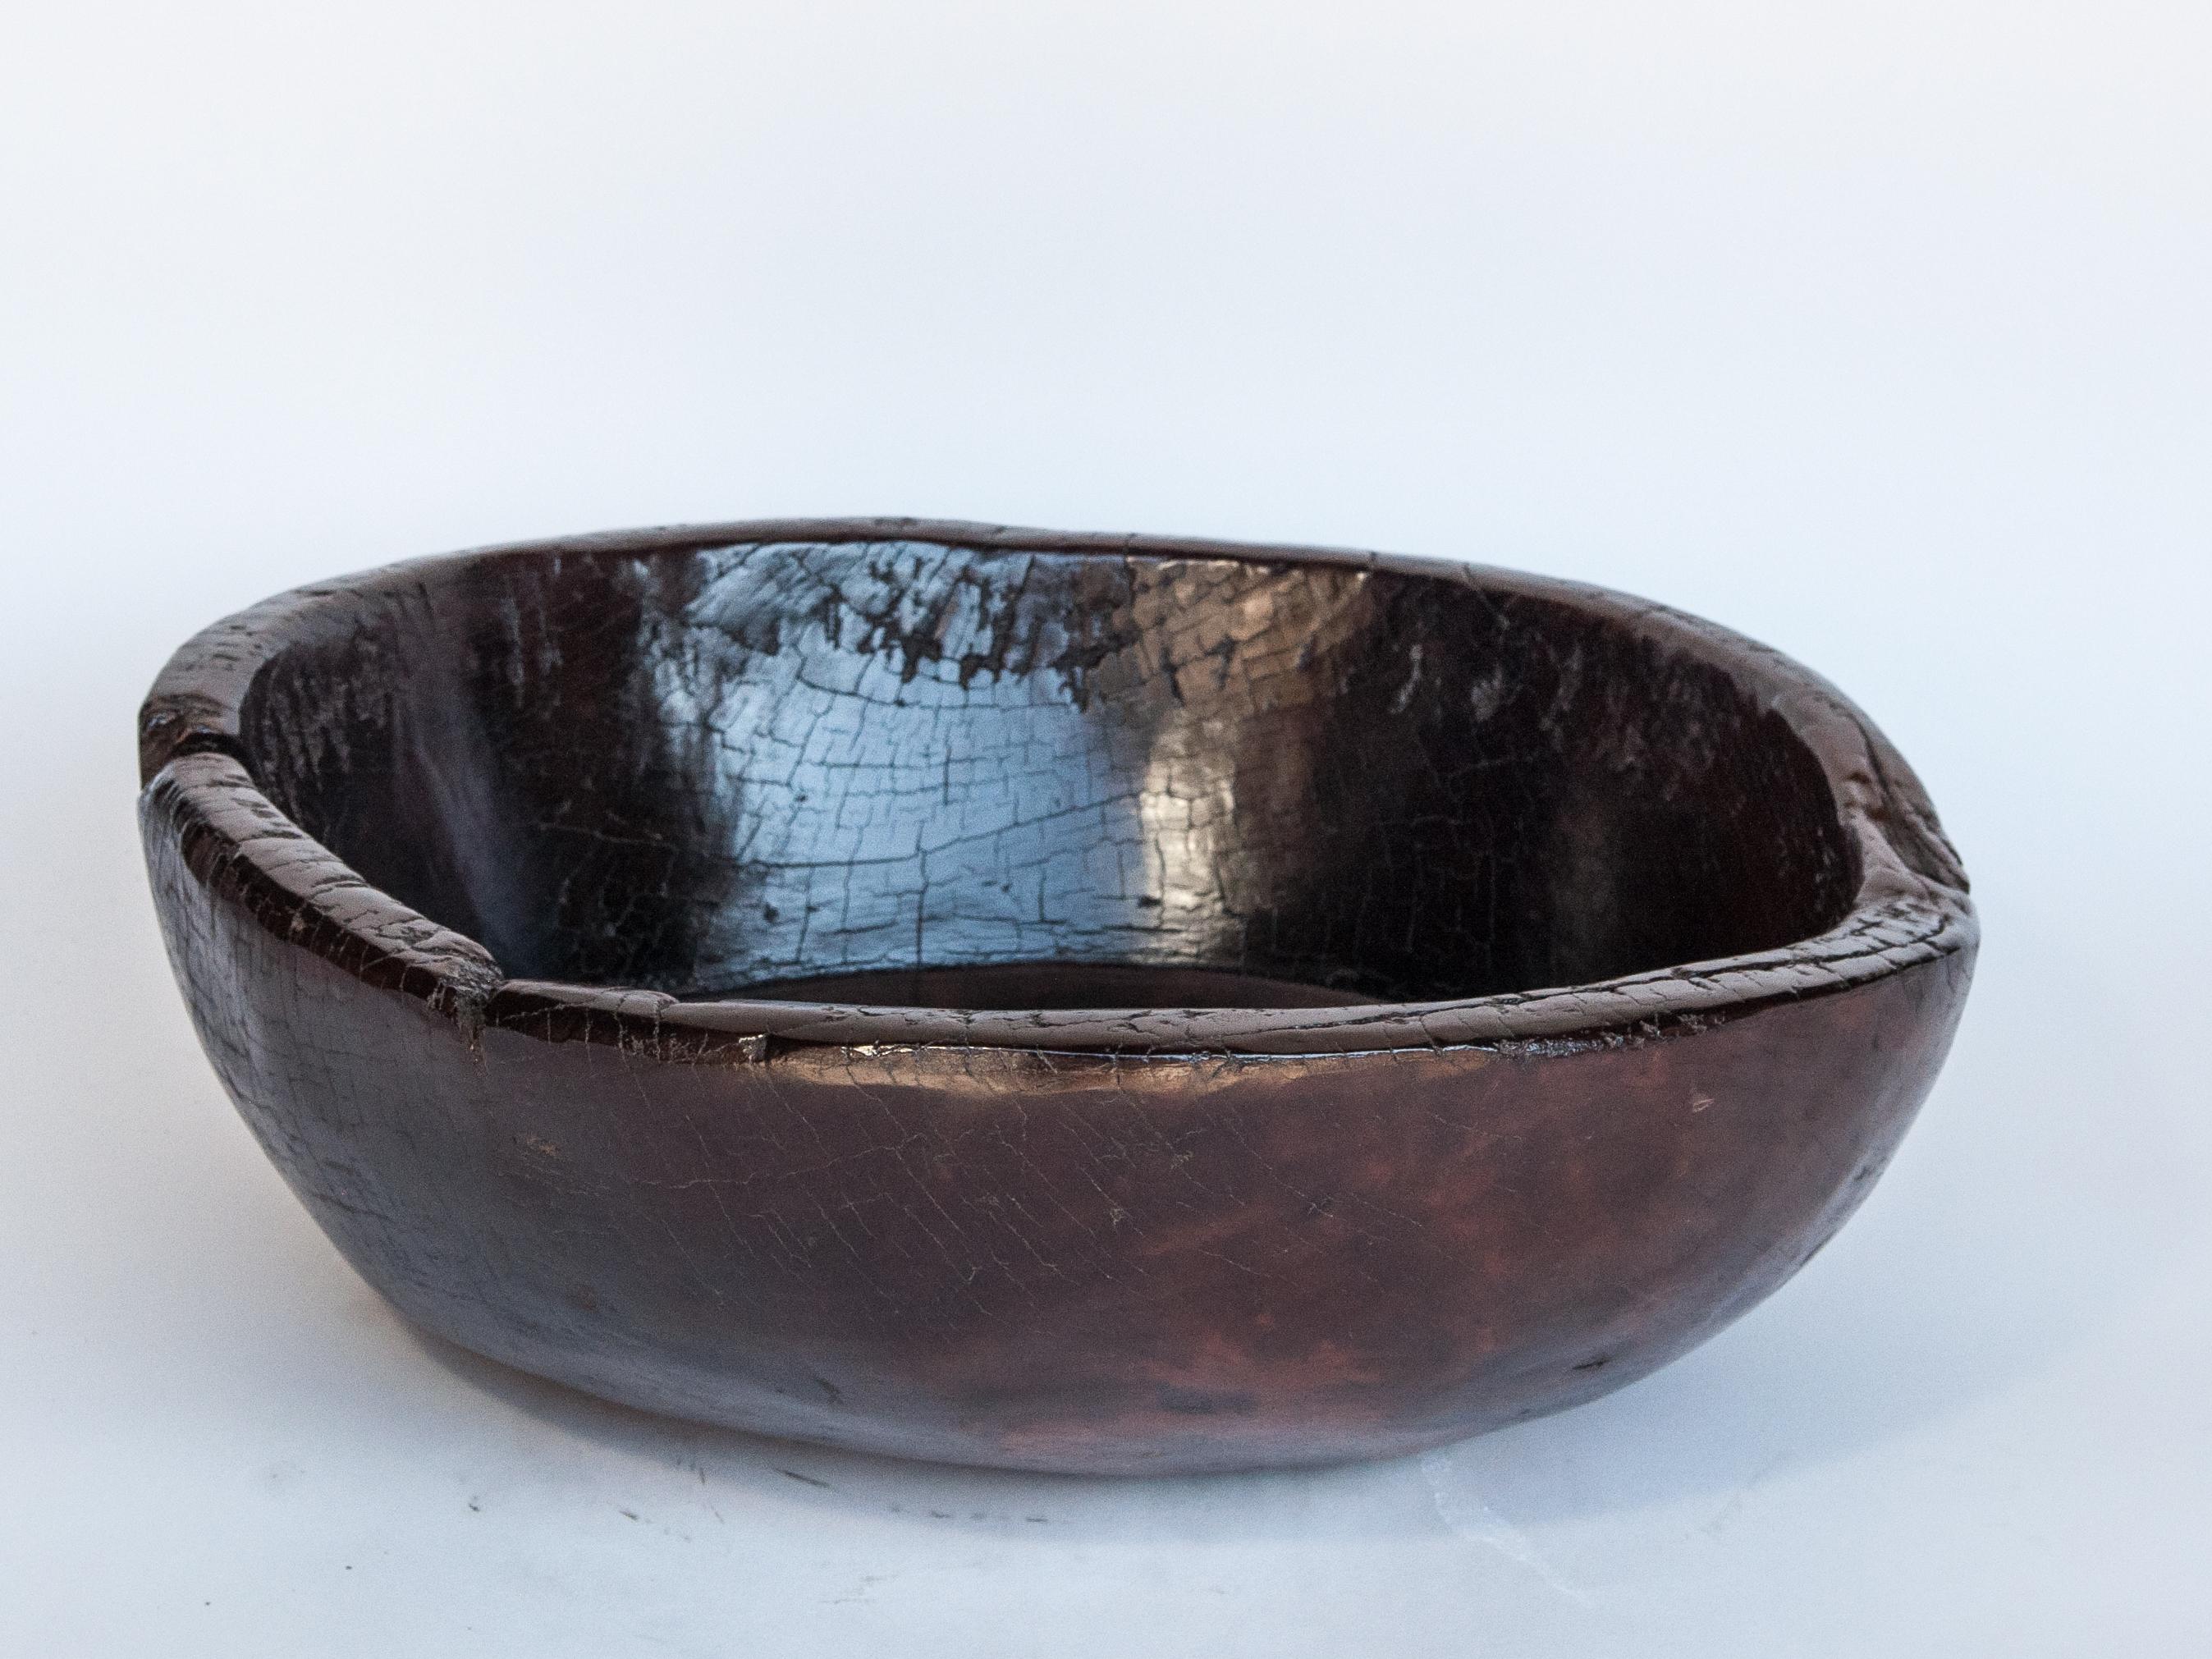 Hardwood Old Tribal Wooden Bowl from the Nepal Himal, Mid-20th Century